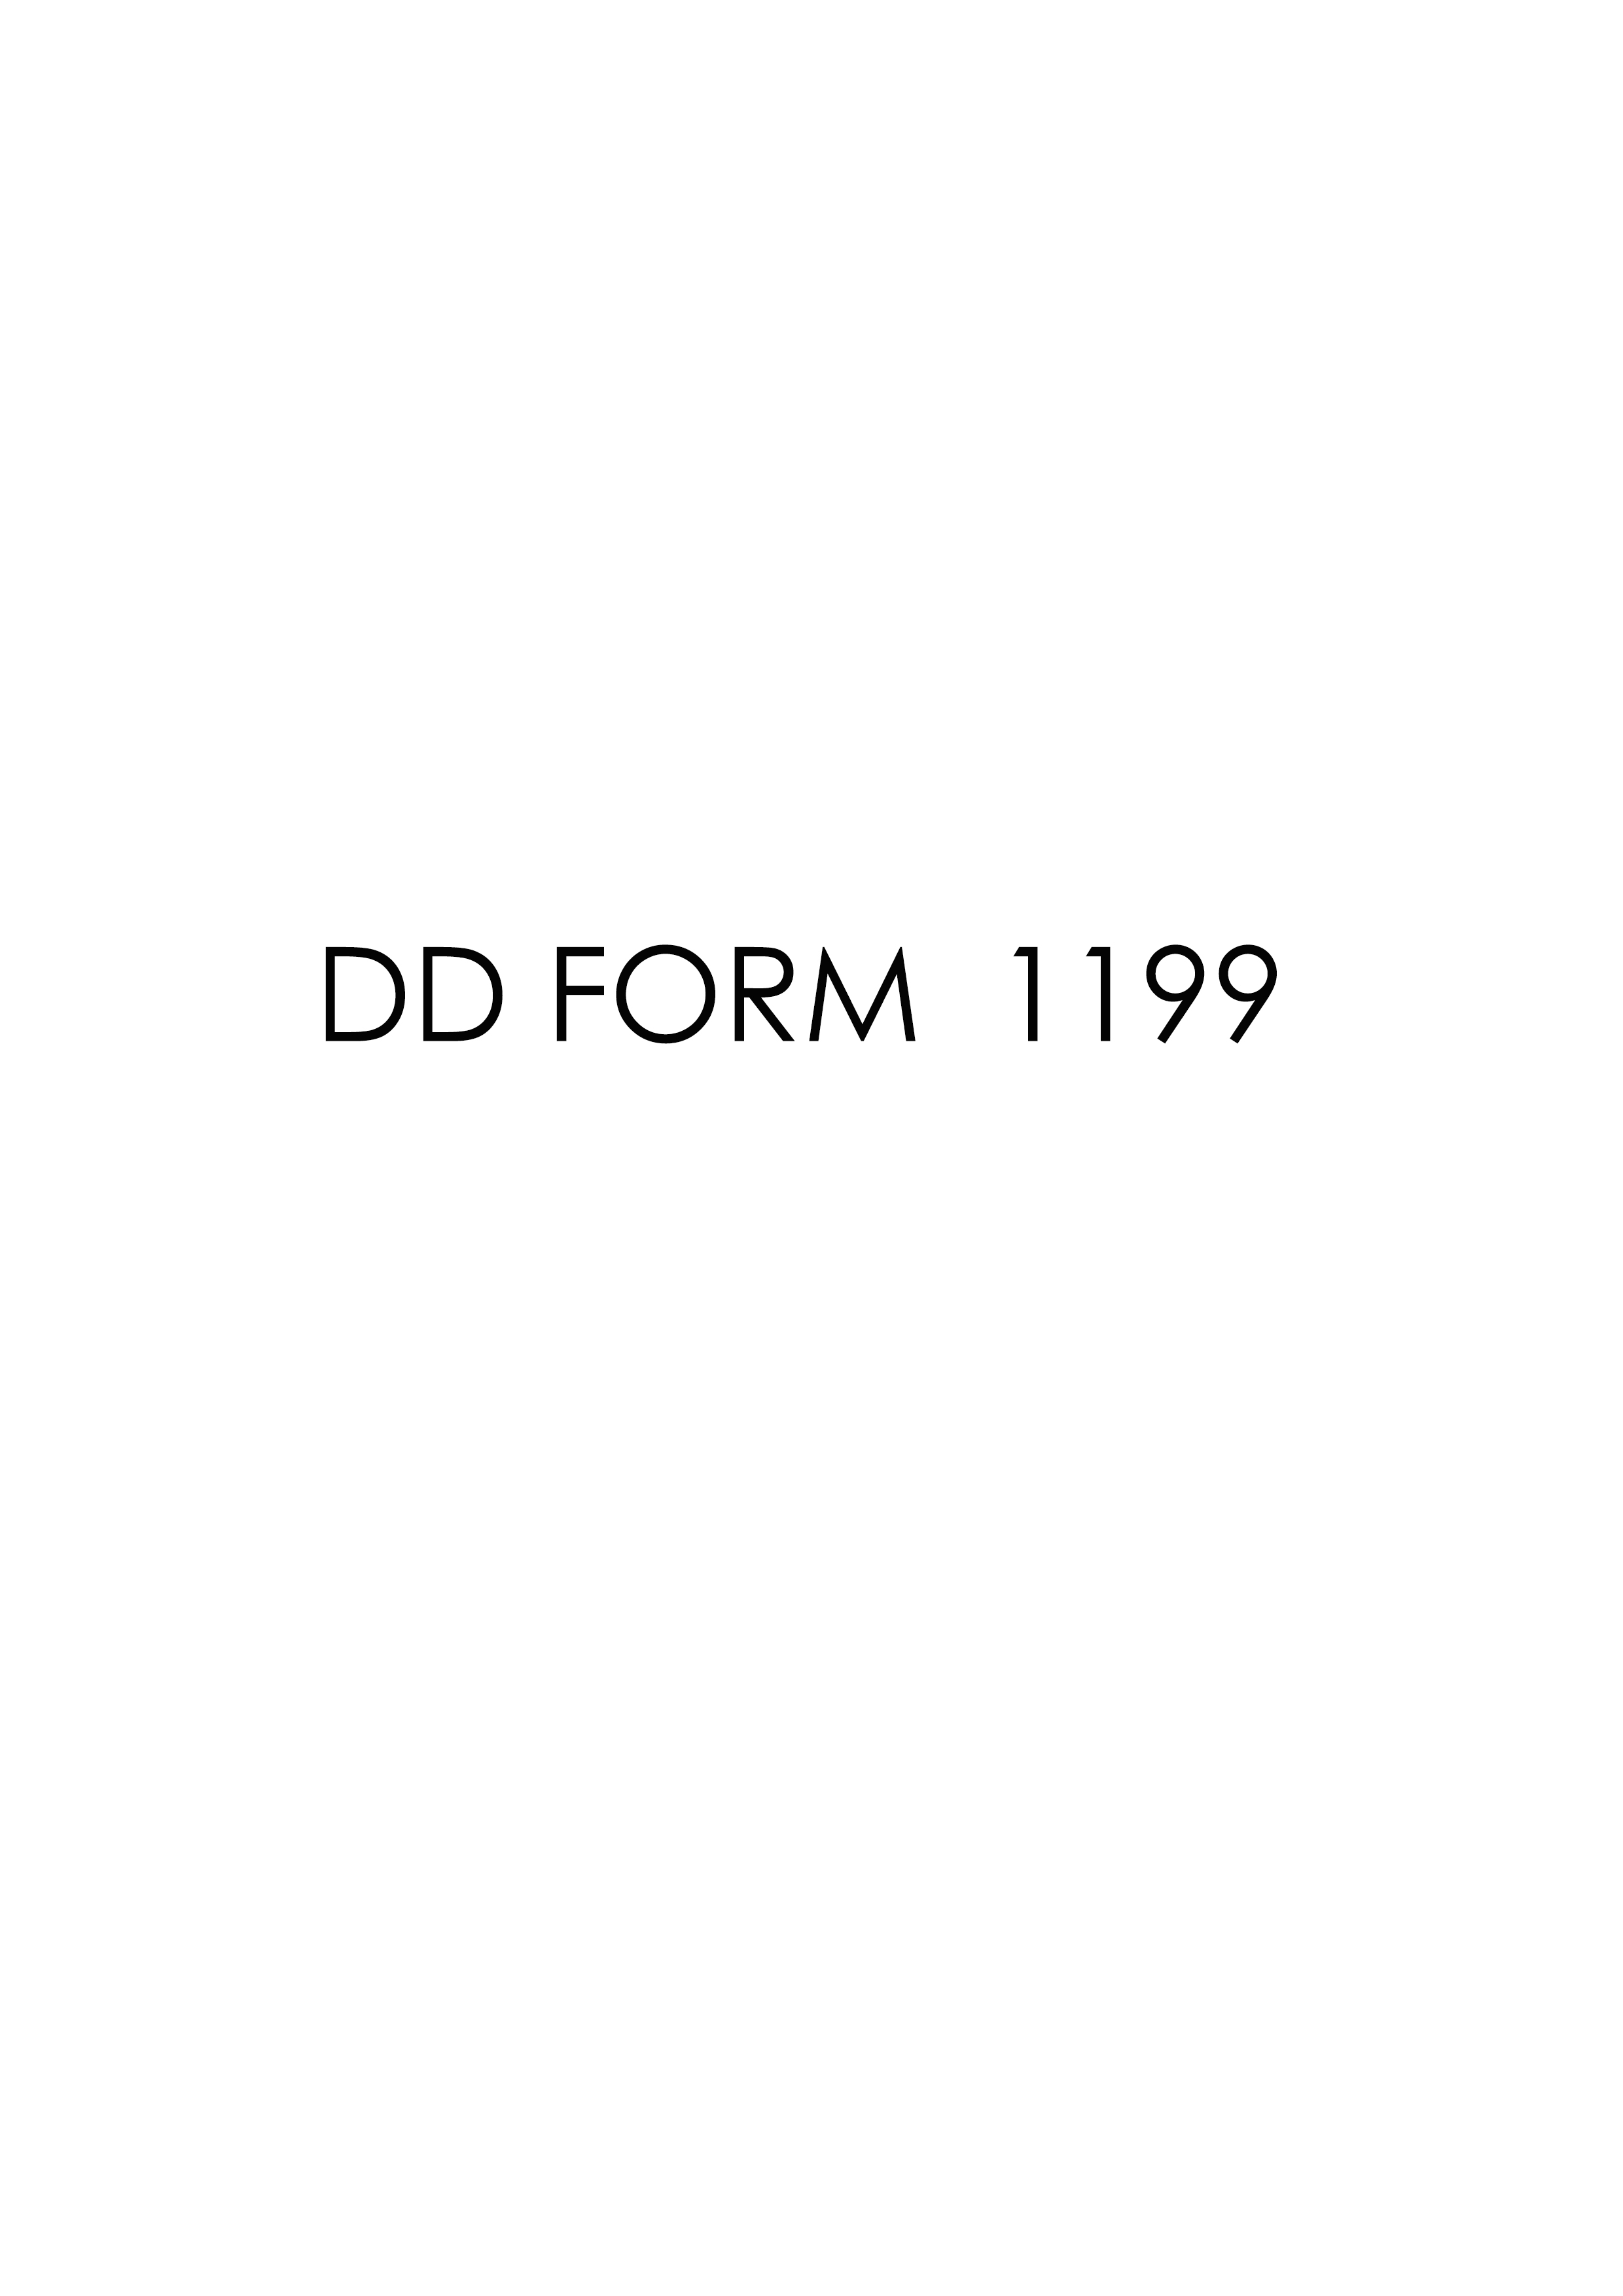 dd Form 1199 fillable